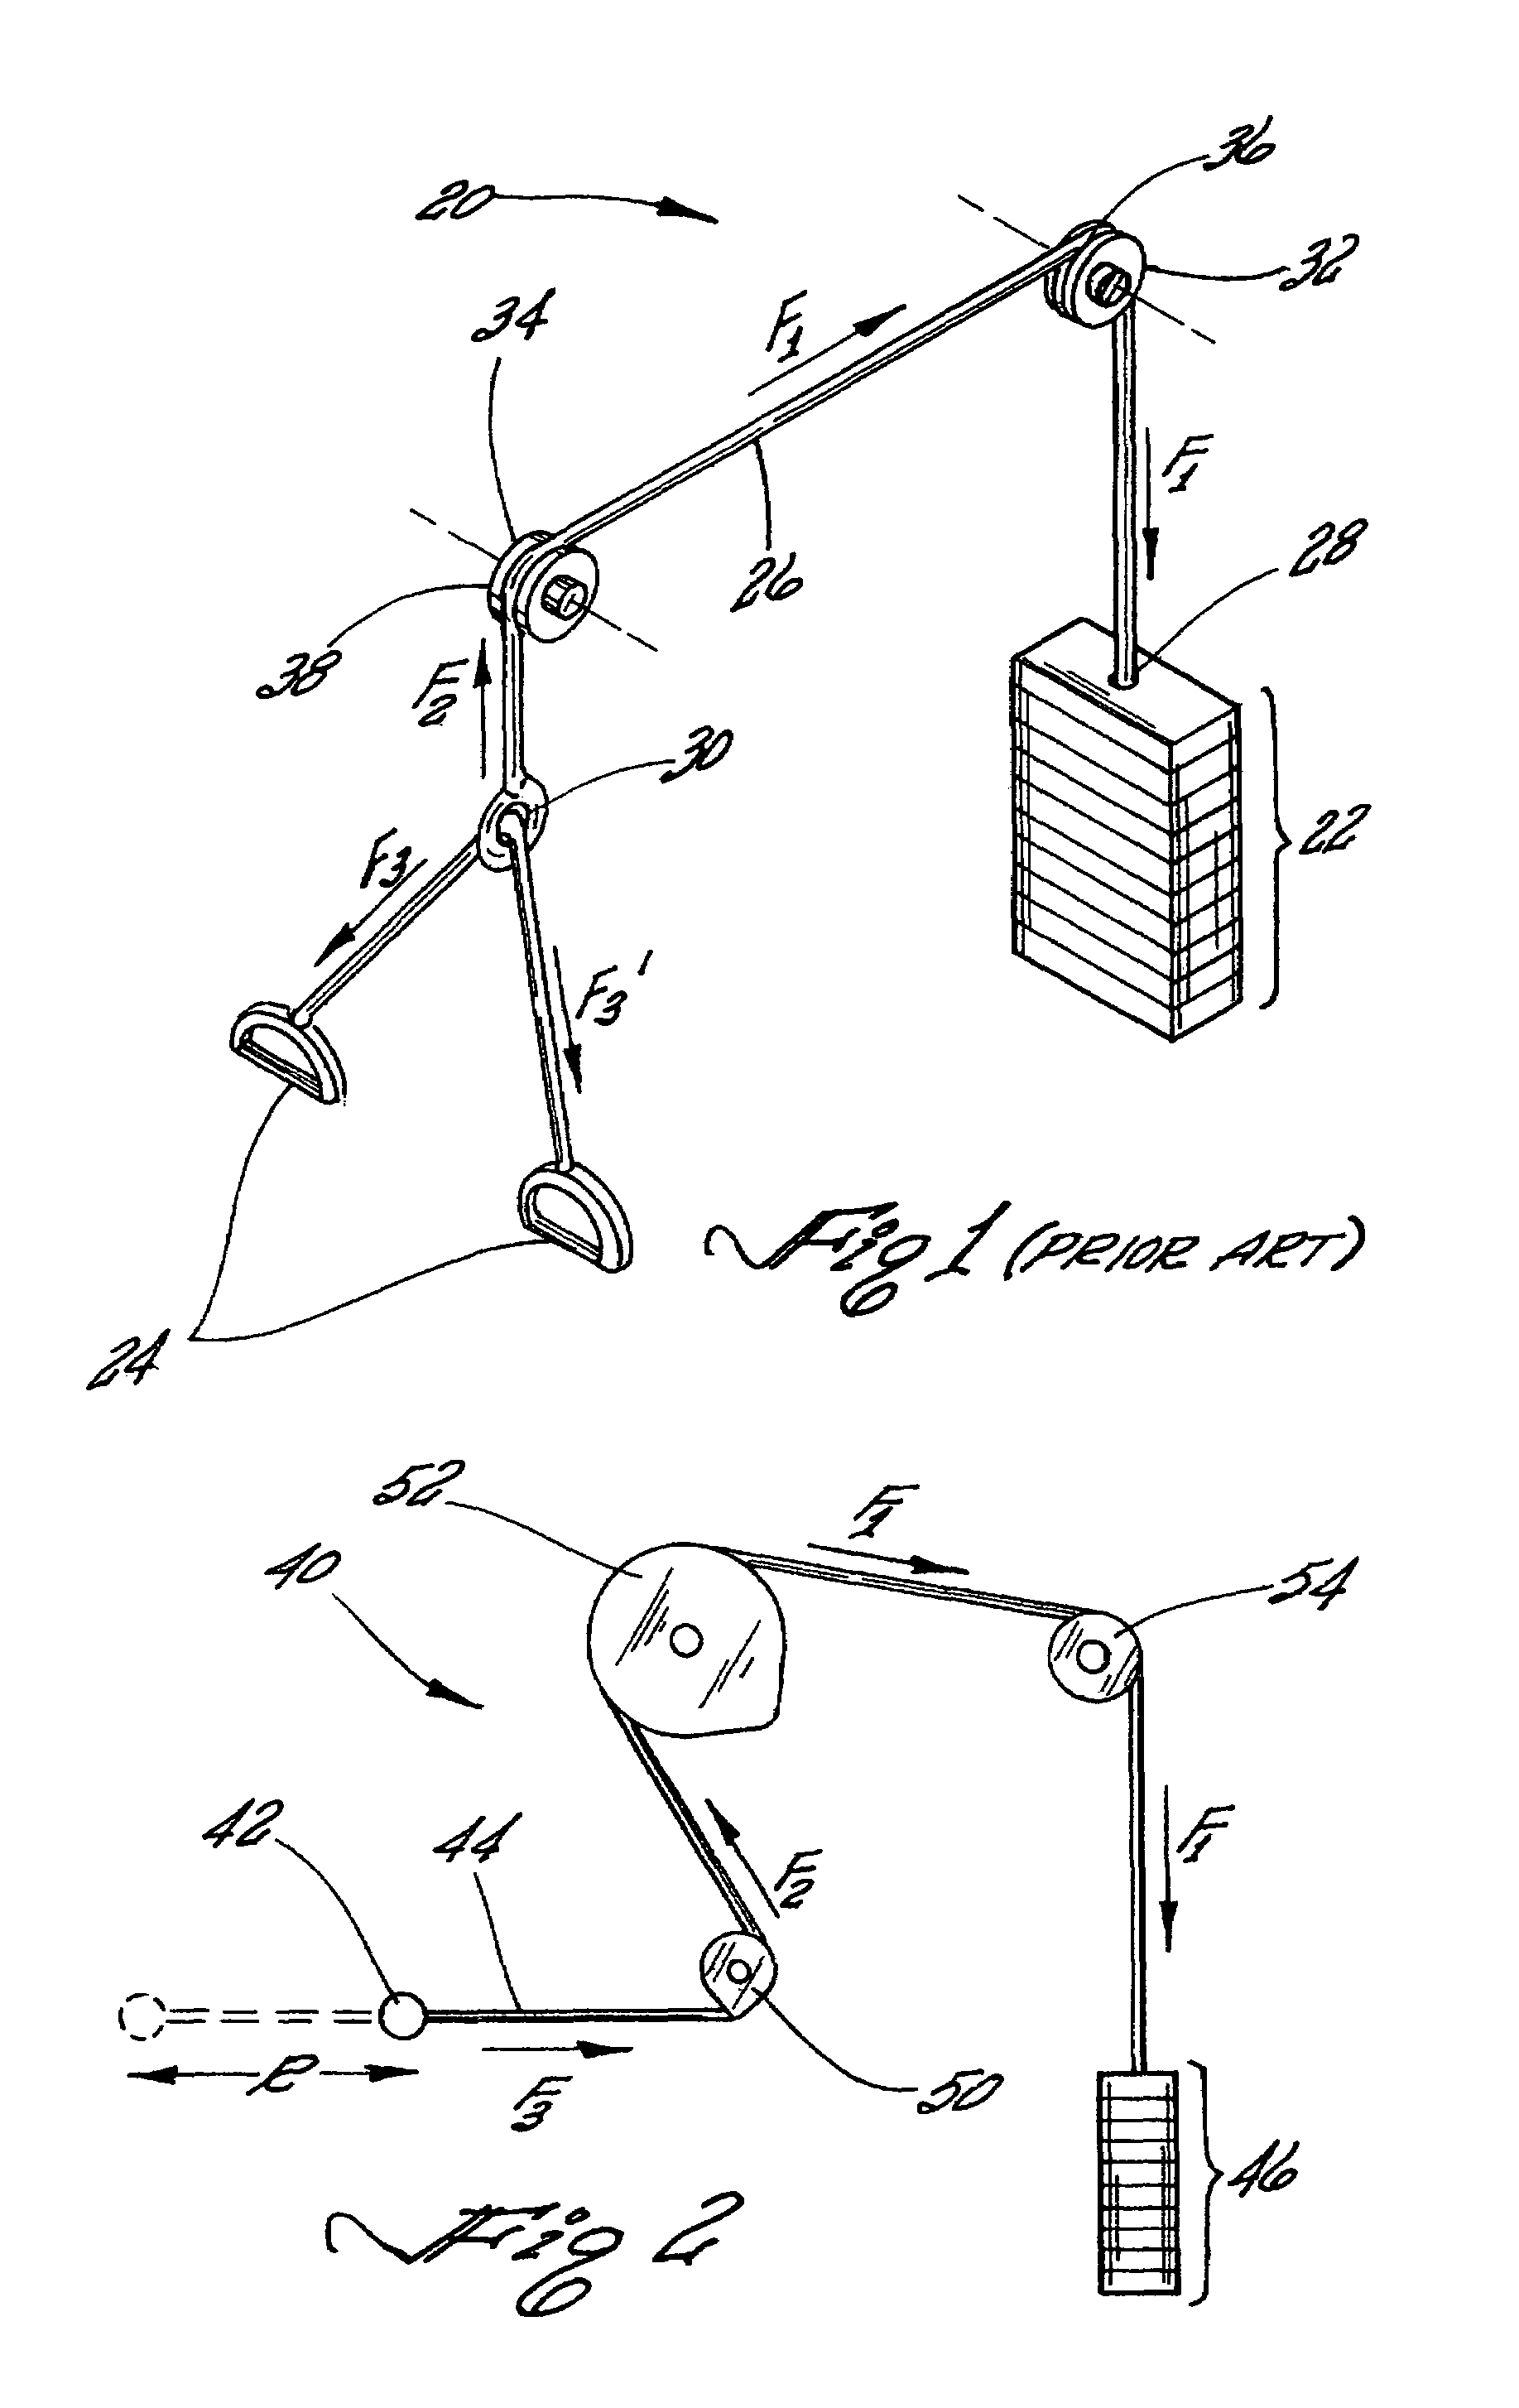 Varying force vector exercise device for inducing musculature perturbations